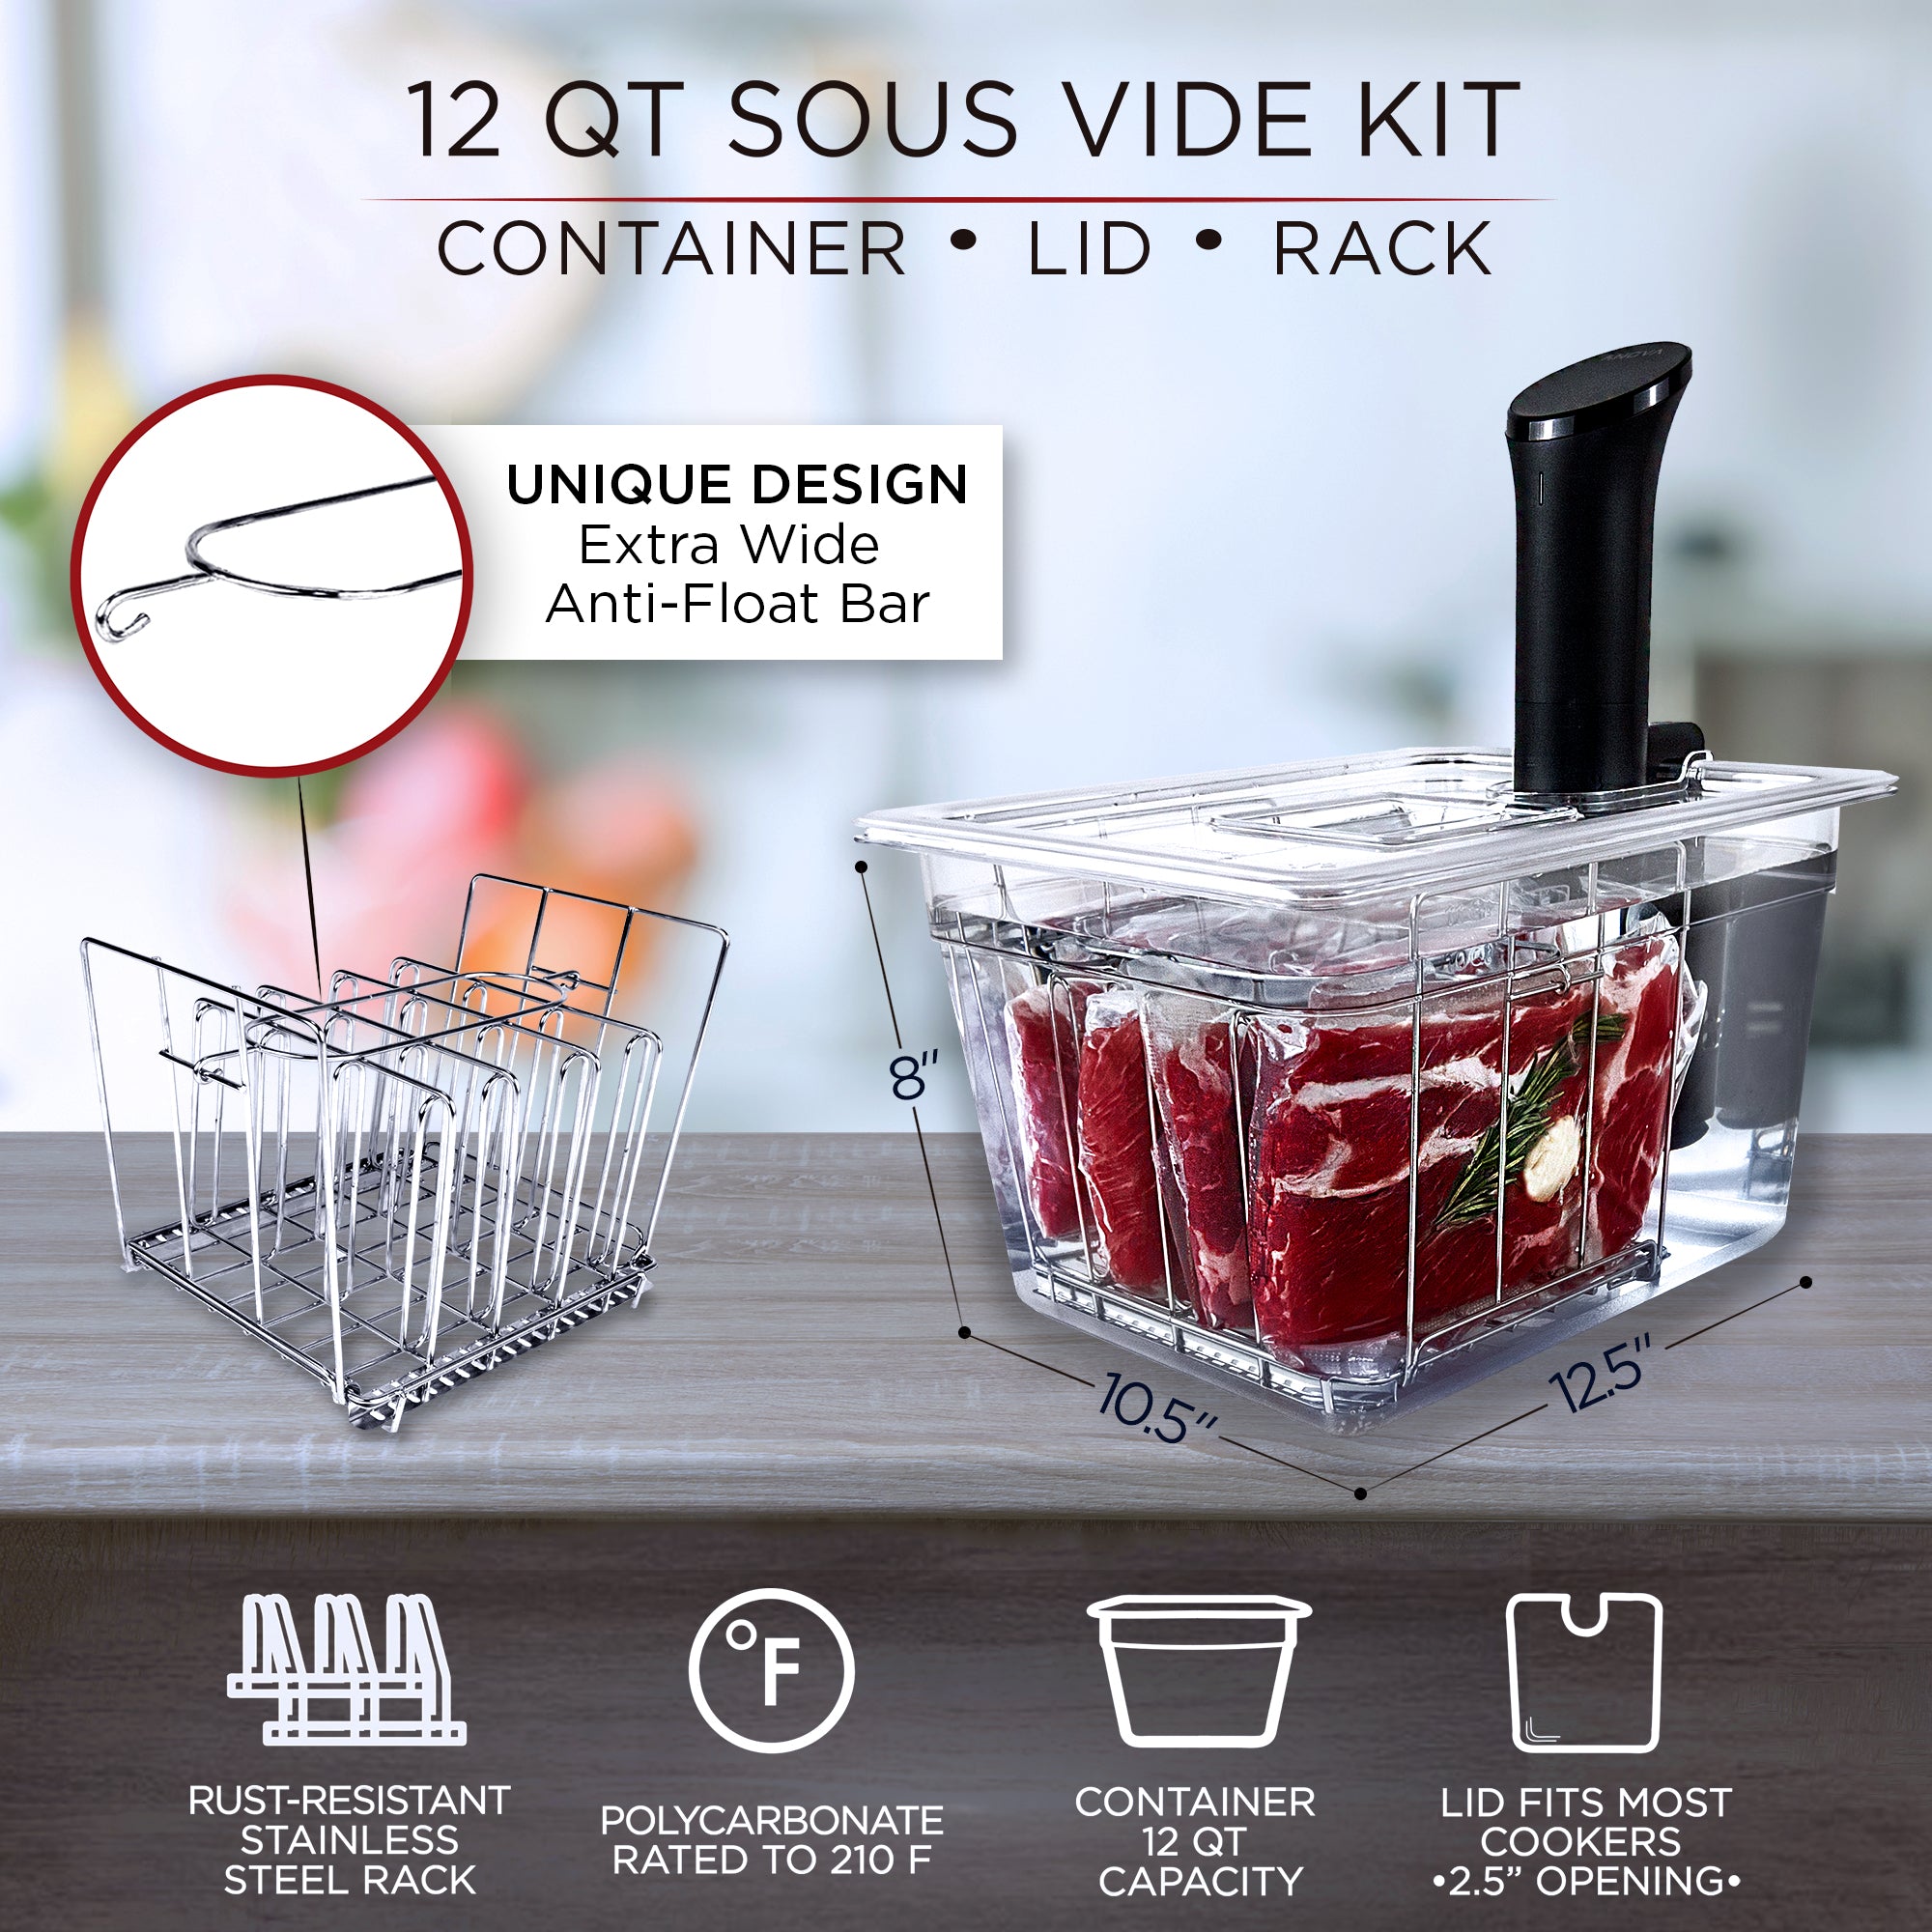 VÄESKE Sous Vide Container with Lid & Rack Set - 12 Quart Accessories Kit for Most Sous Vide Cookers - Durable Polycarbonate and Rust-Resistant Stainless Steel